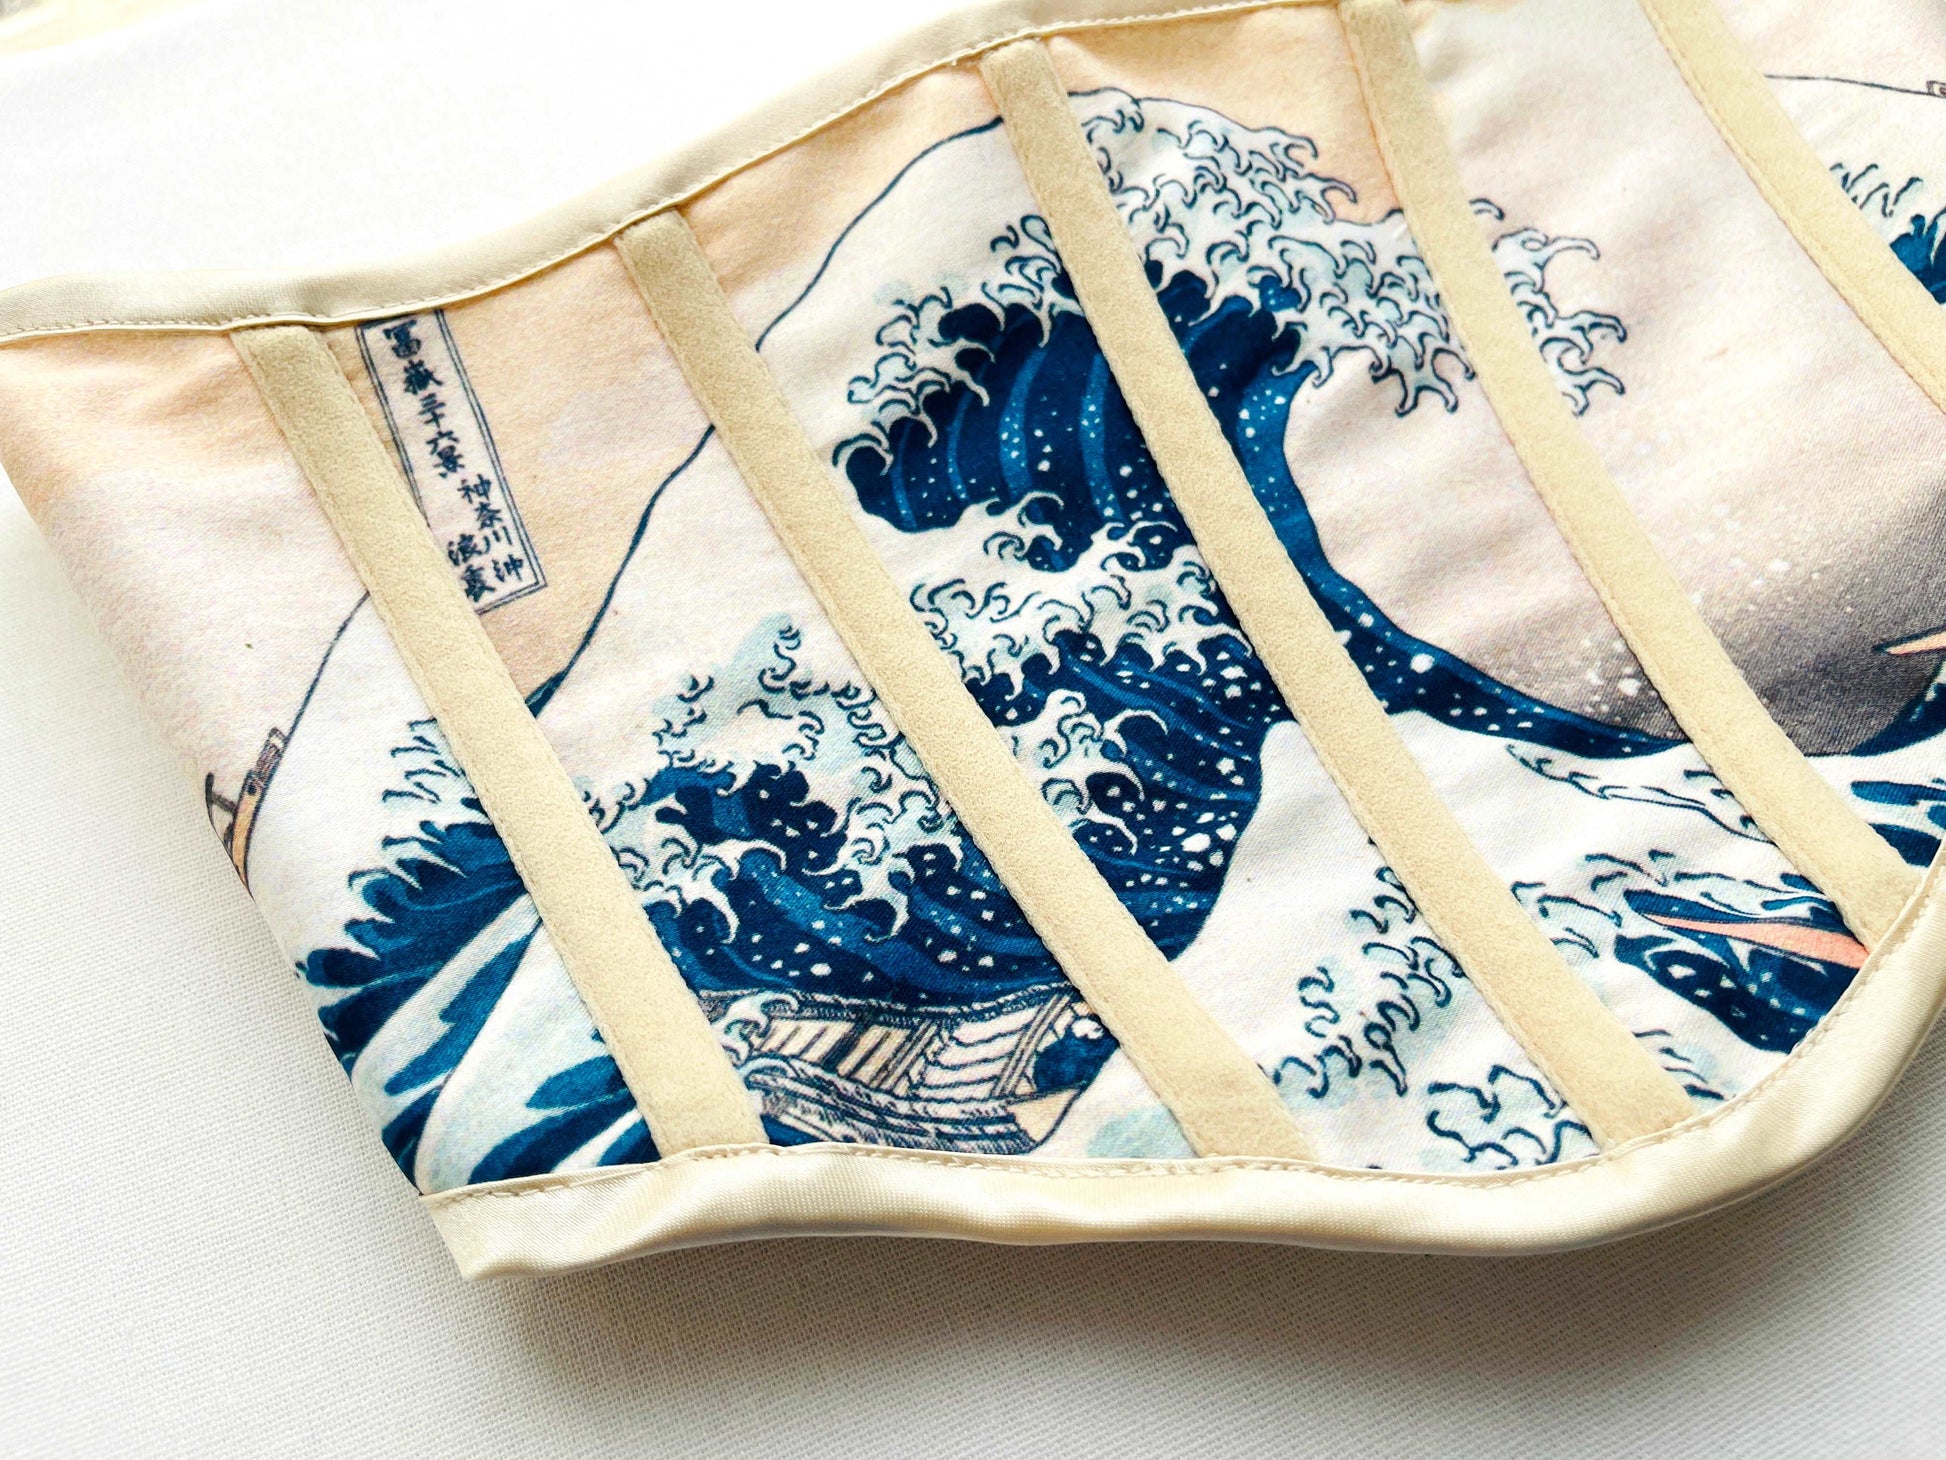 Close-up of the Handmade Vintage Under Bust Corset - The Great Wave off Kanagawa detailing on a white background.